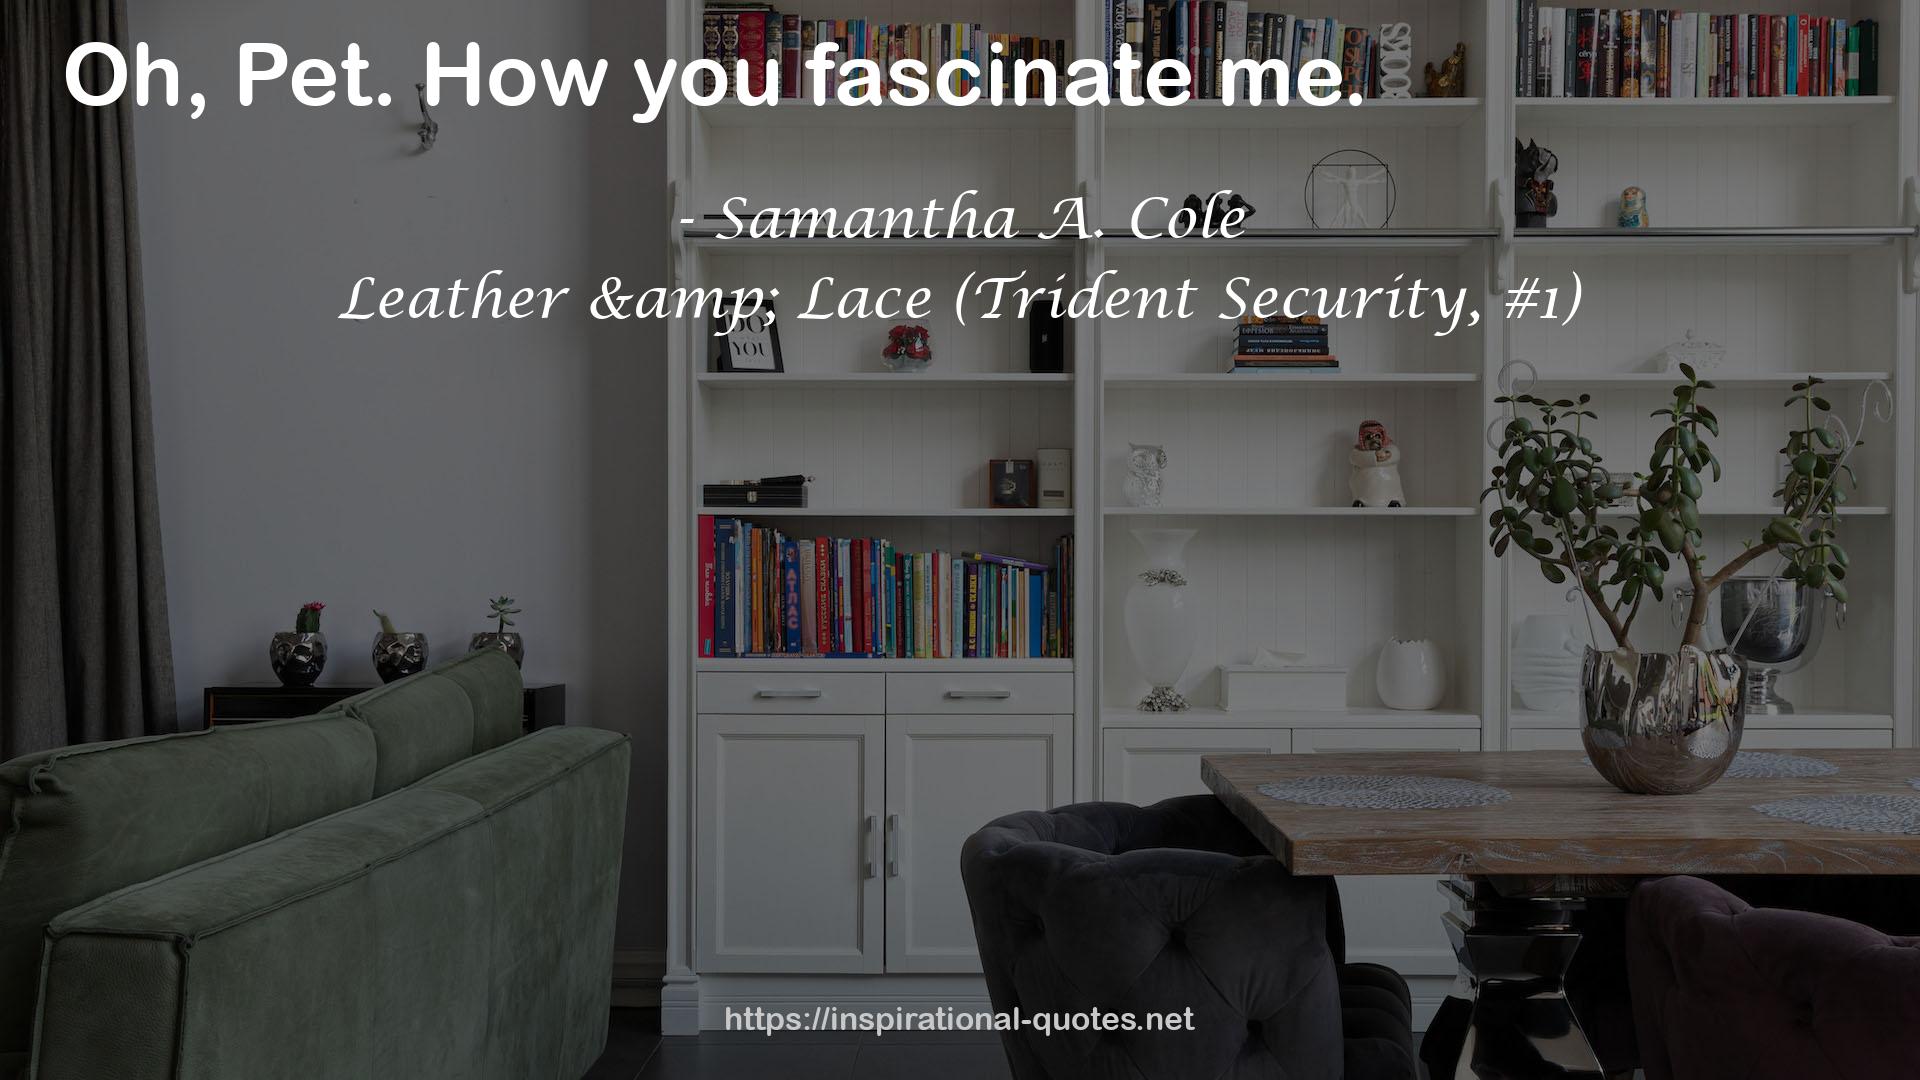 Samantha A. Cole QUOTES